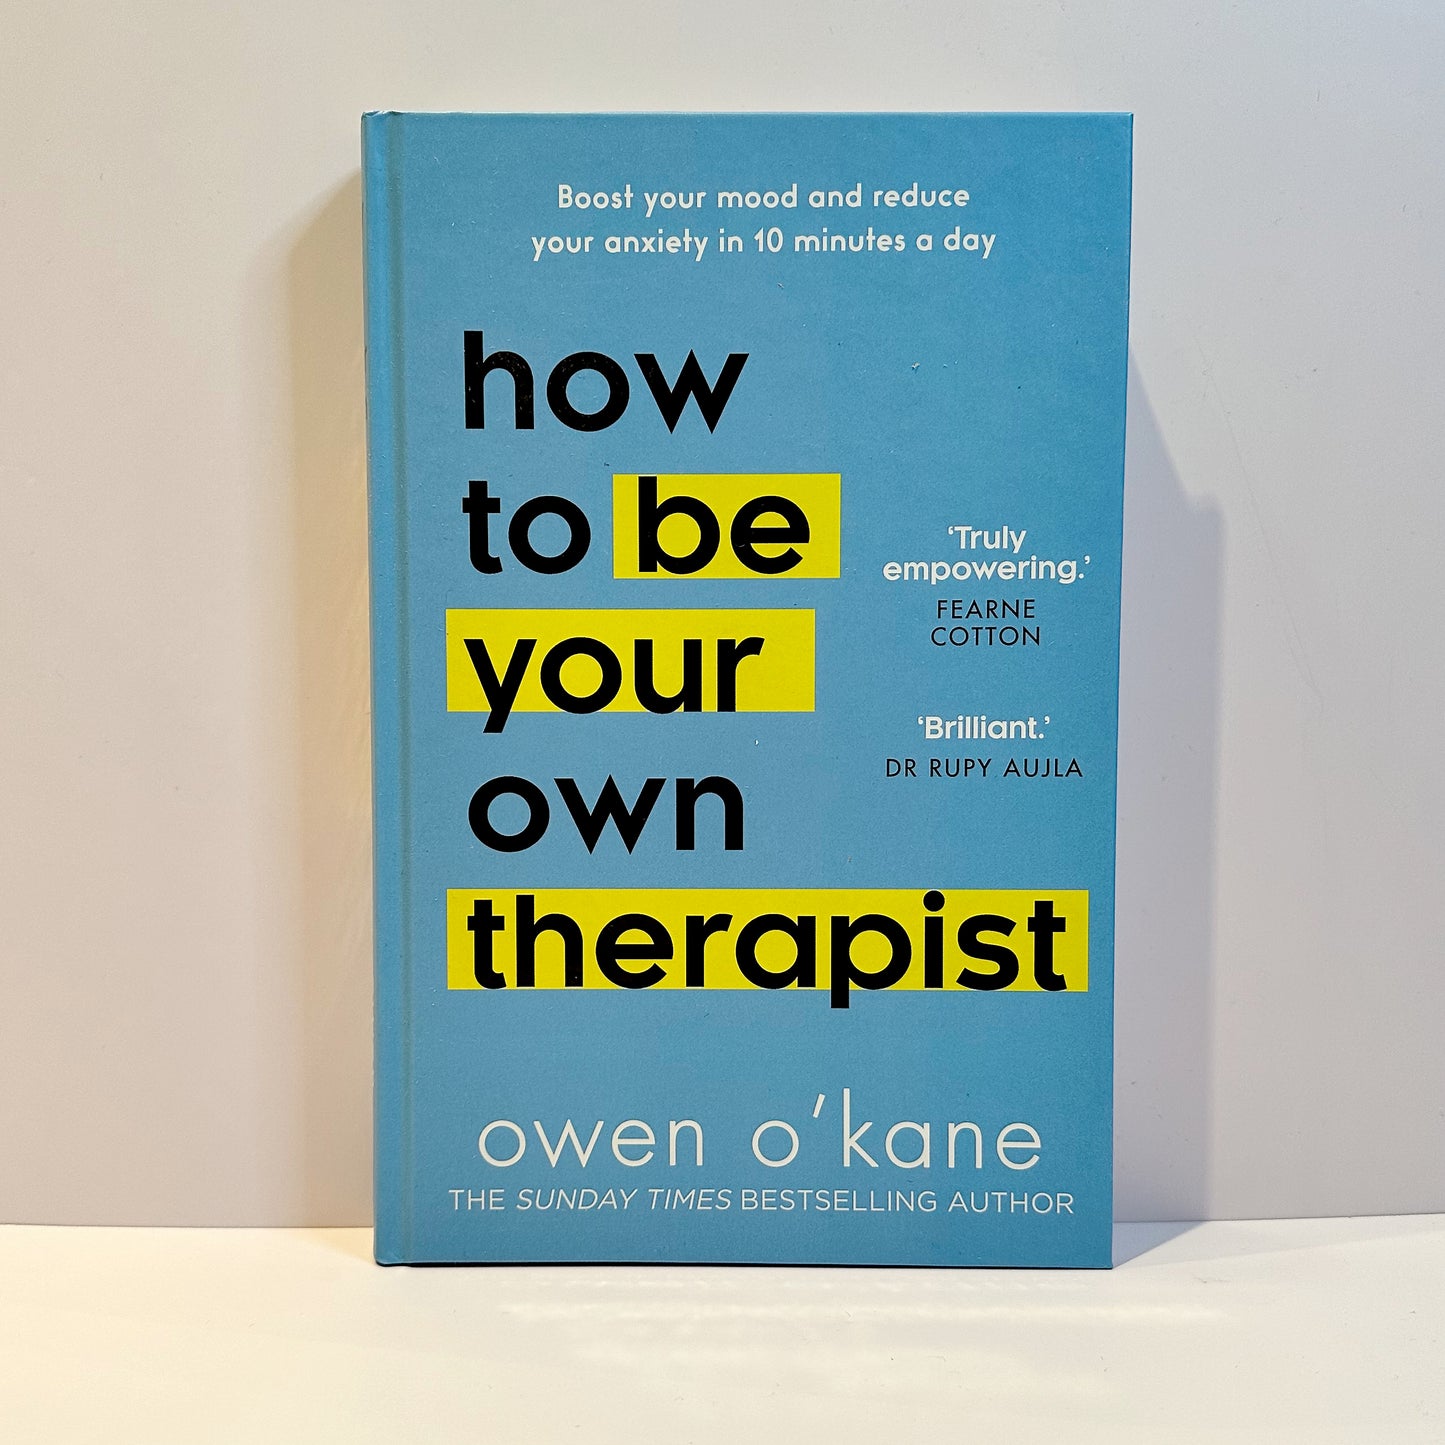 How To Be Your Own Therapist  -  Owen O’Kane